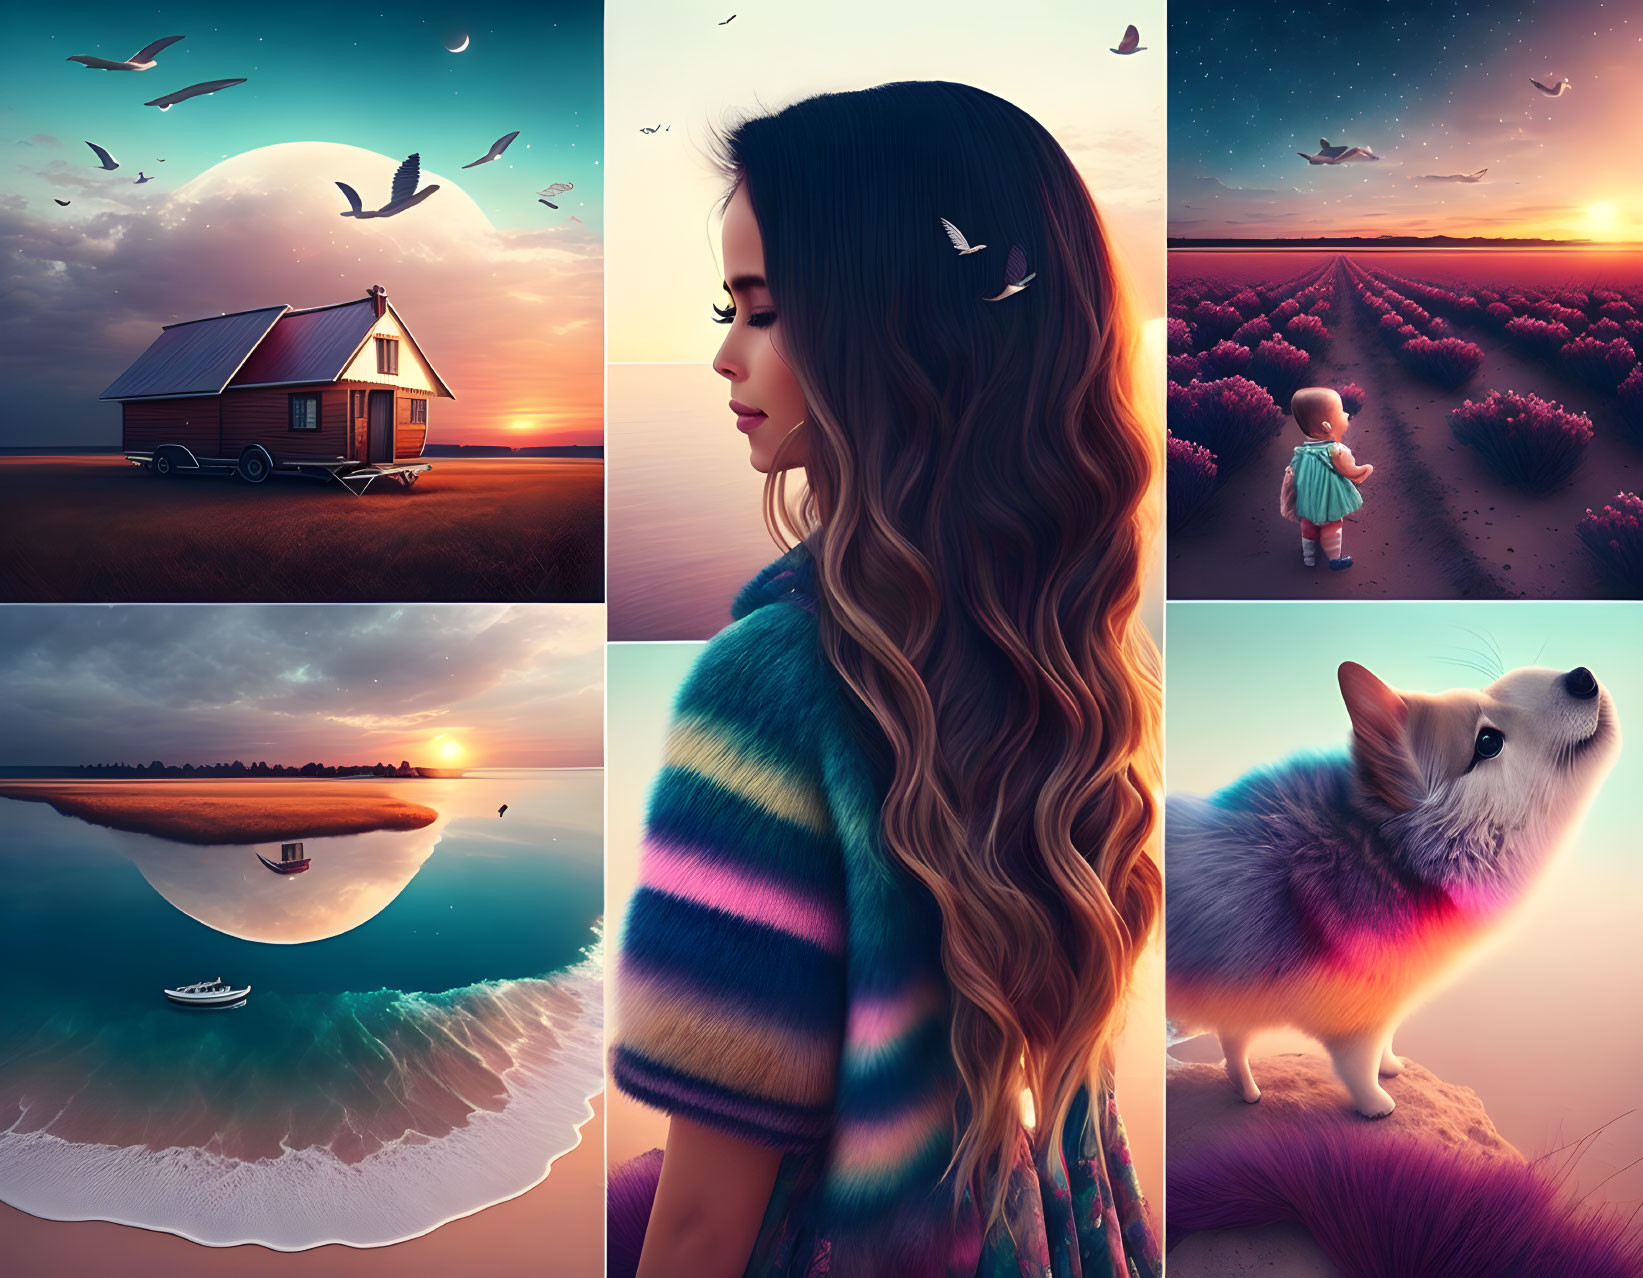 Five surreal images: house at dawn, flowing hair woman, lavender field child, flipped beach reflection,